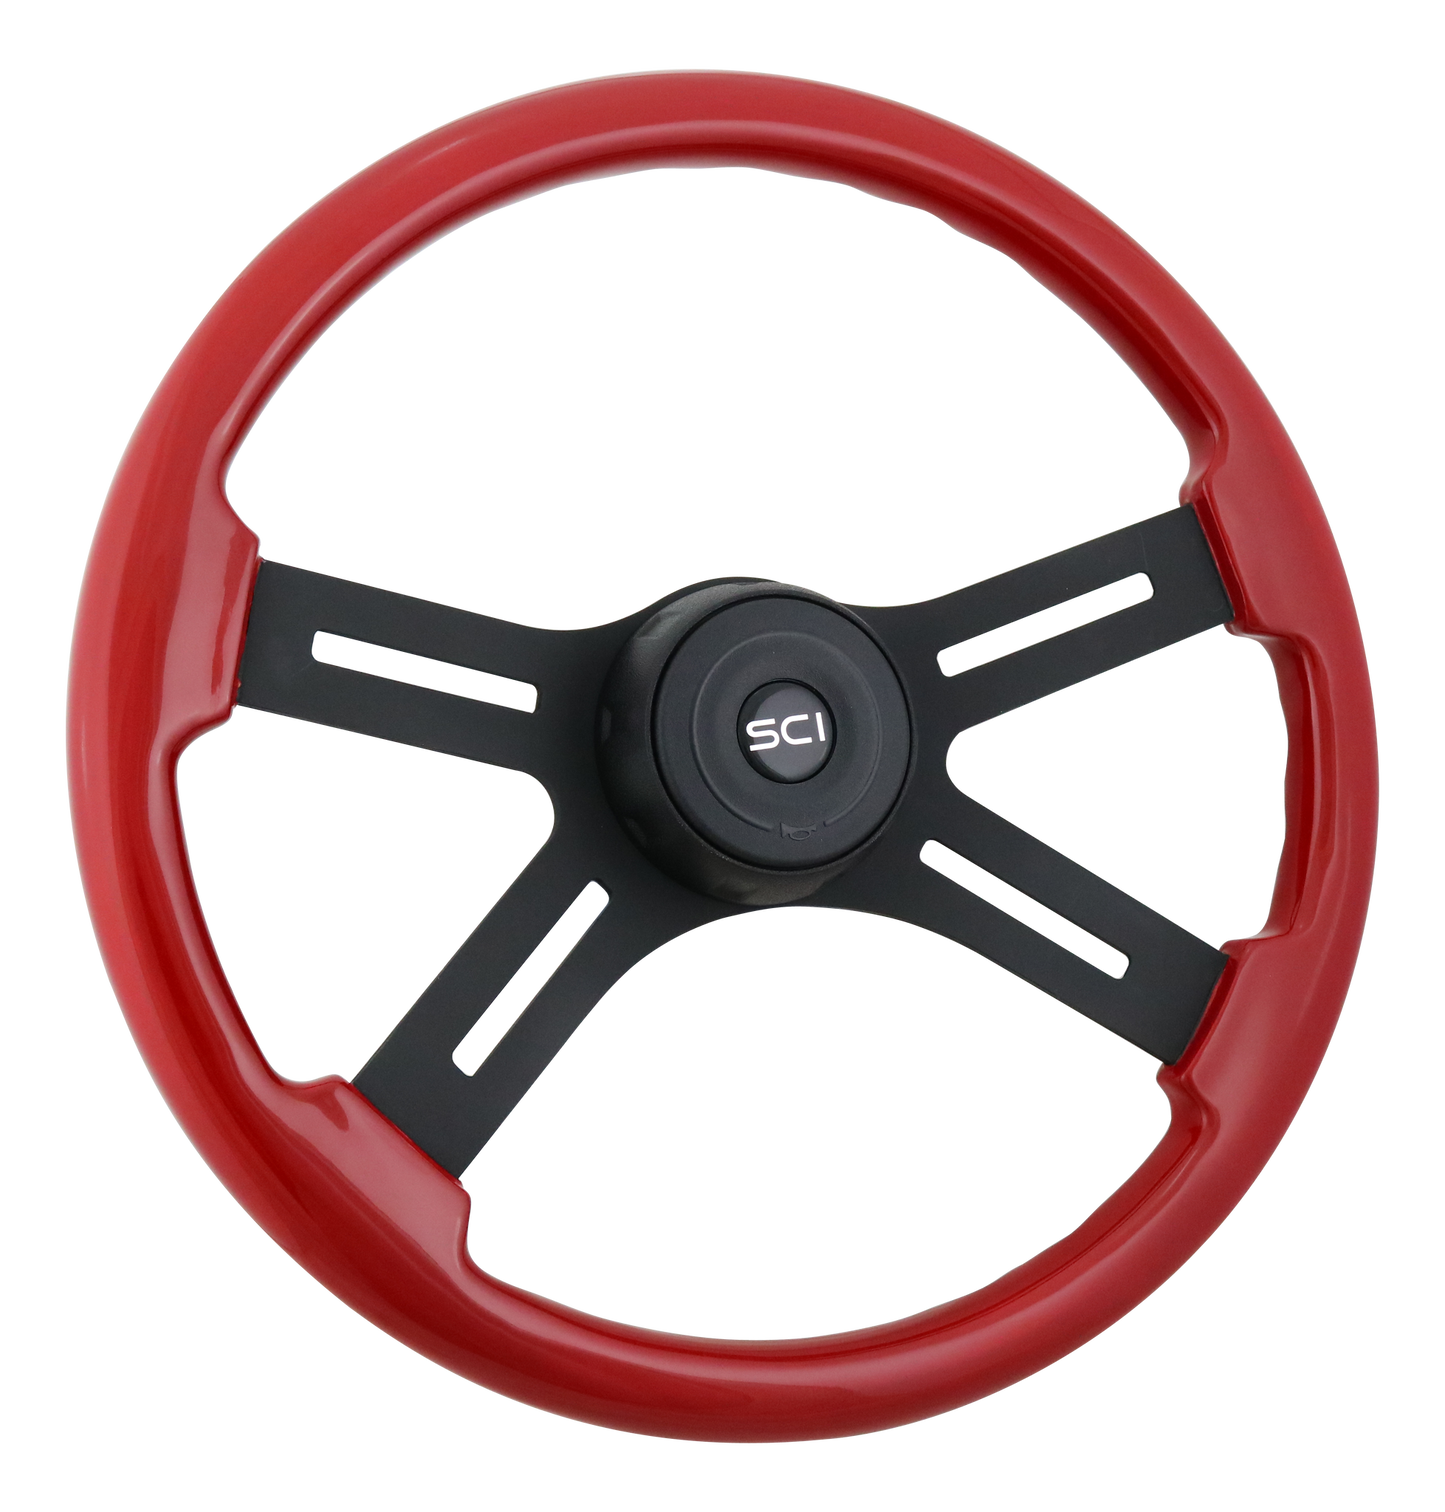 Steering Wheel Onyx Classic Viper Red. 18" Classic Viper Red Painted Wood Rim w/ Resin Overcoat